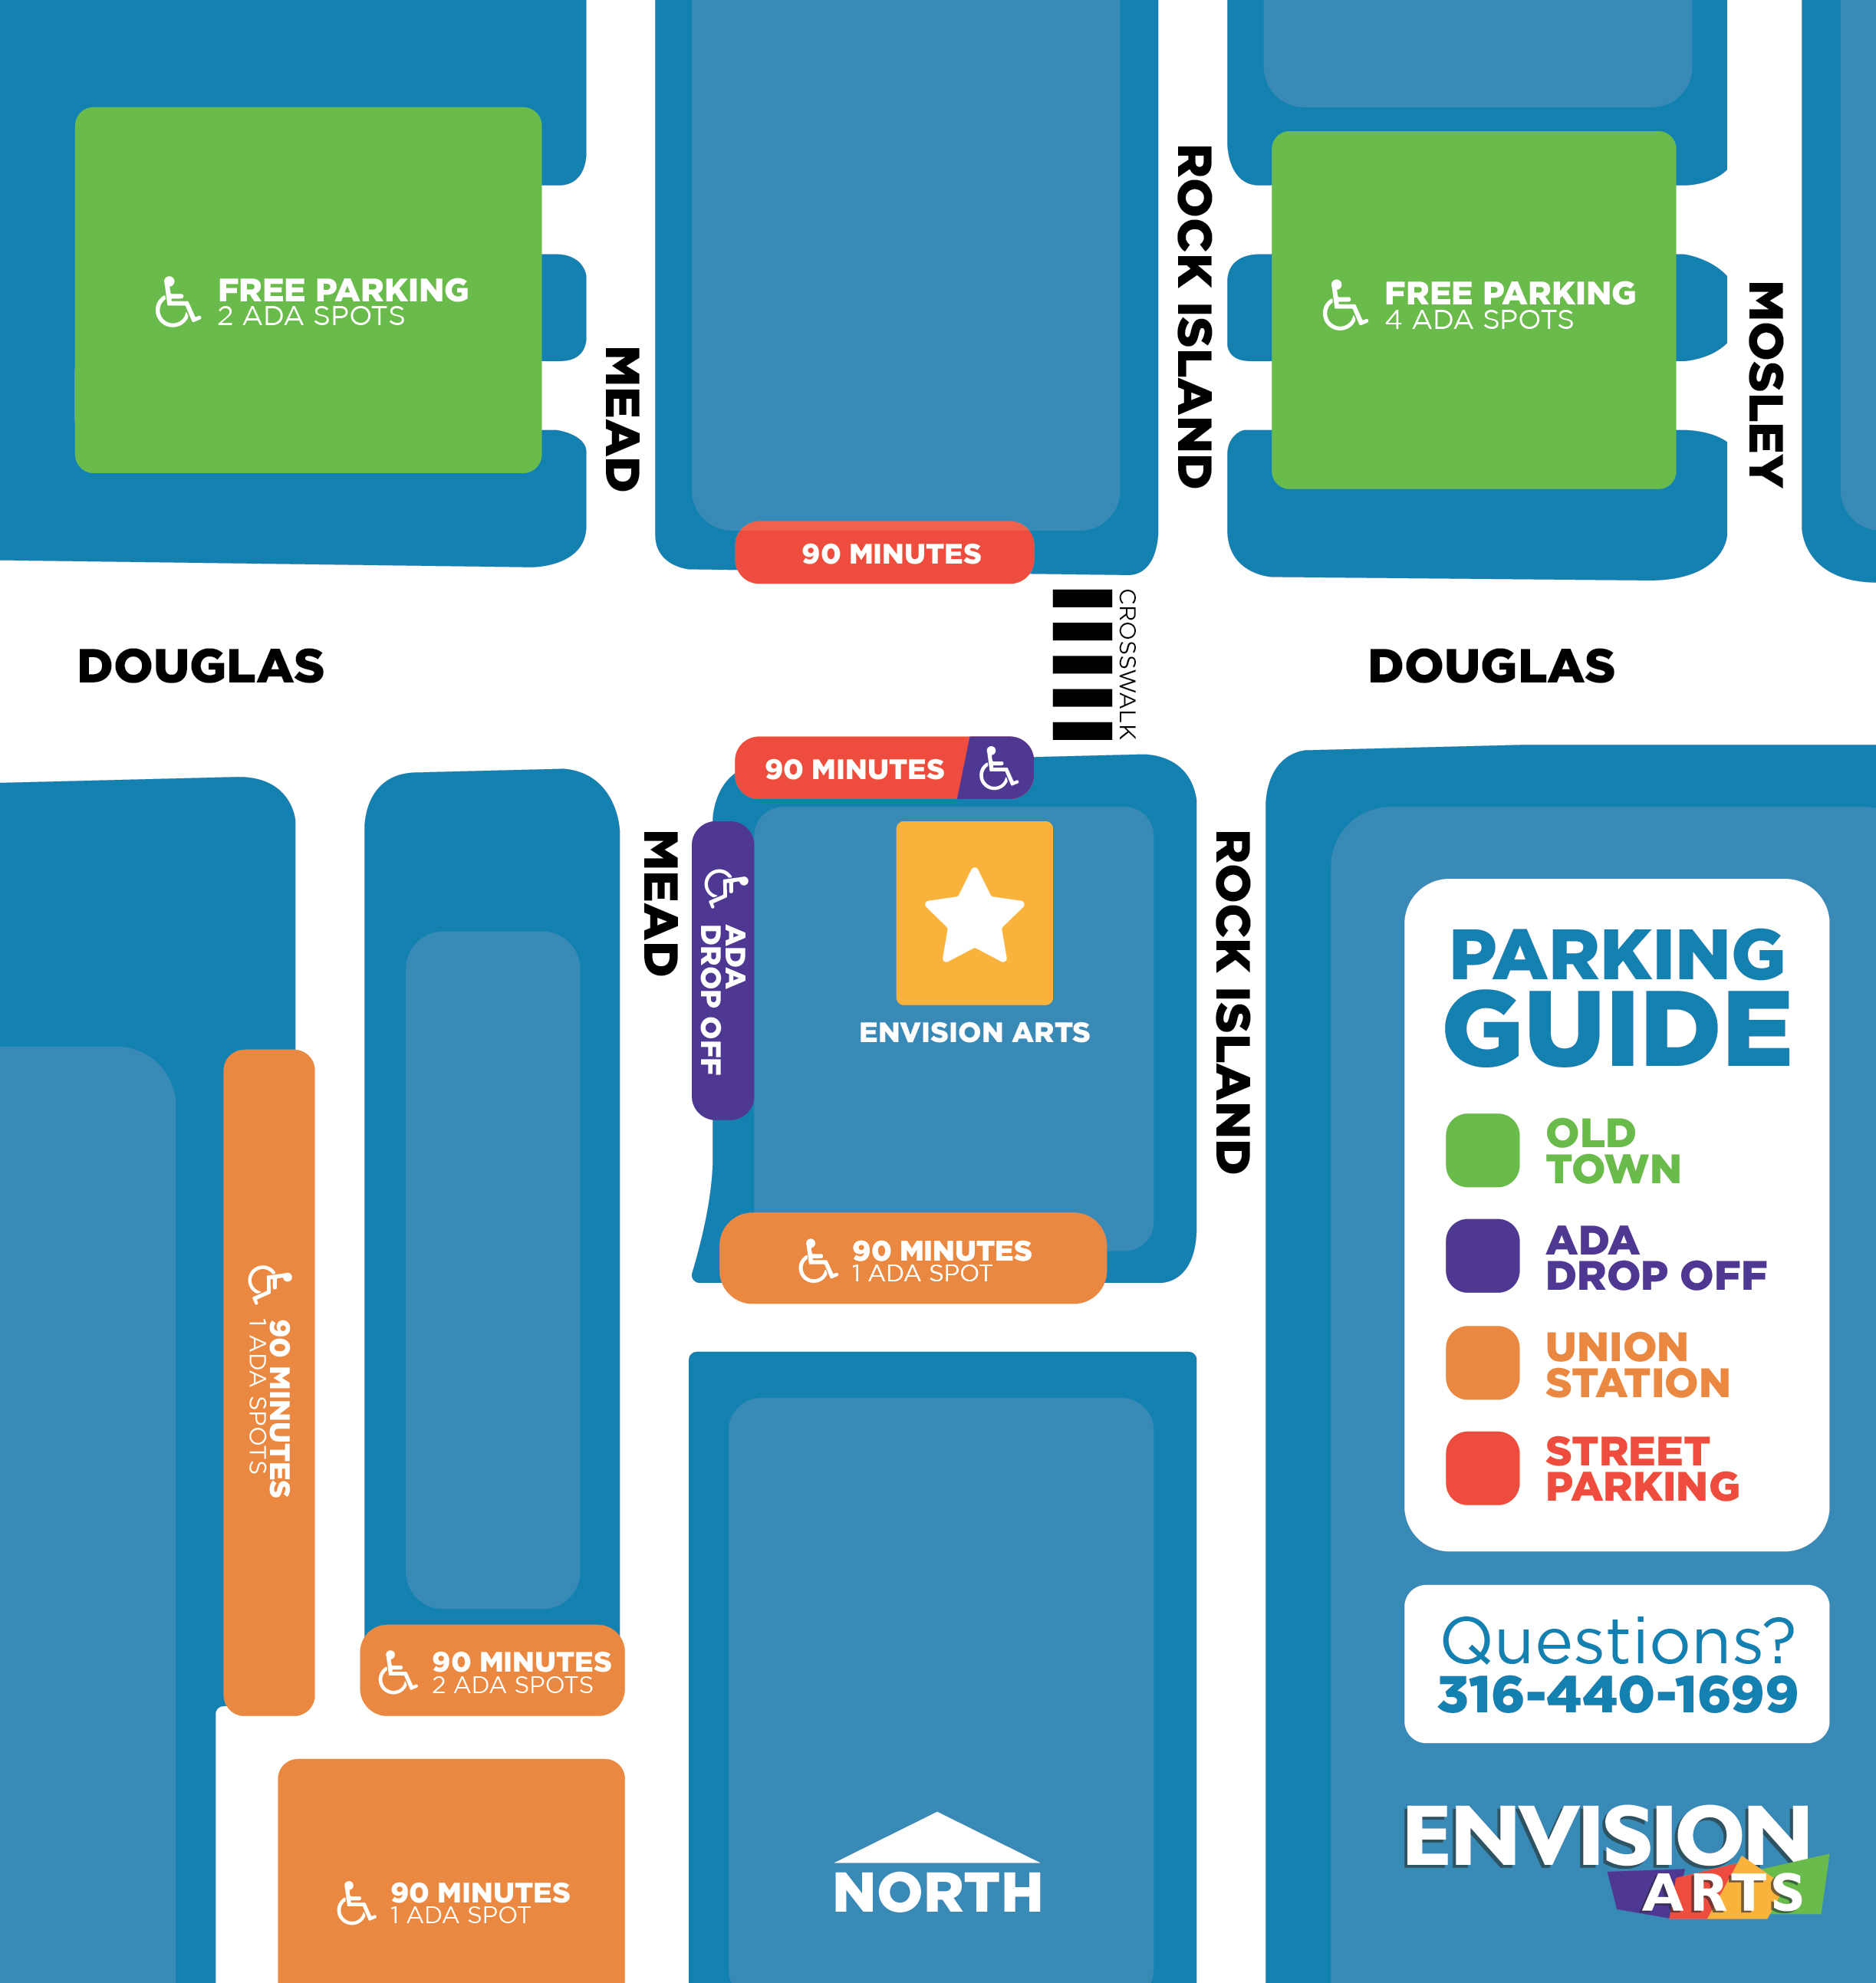 graphical map of the Envision Arts Gallery location on Douglas St. in between Mead St. and Rock Island Ave. 